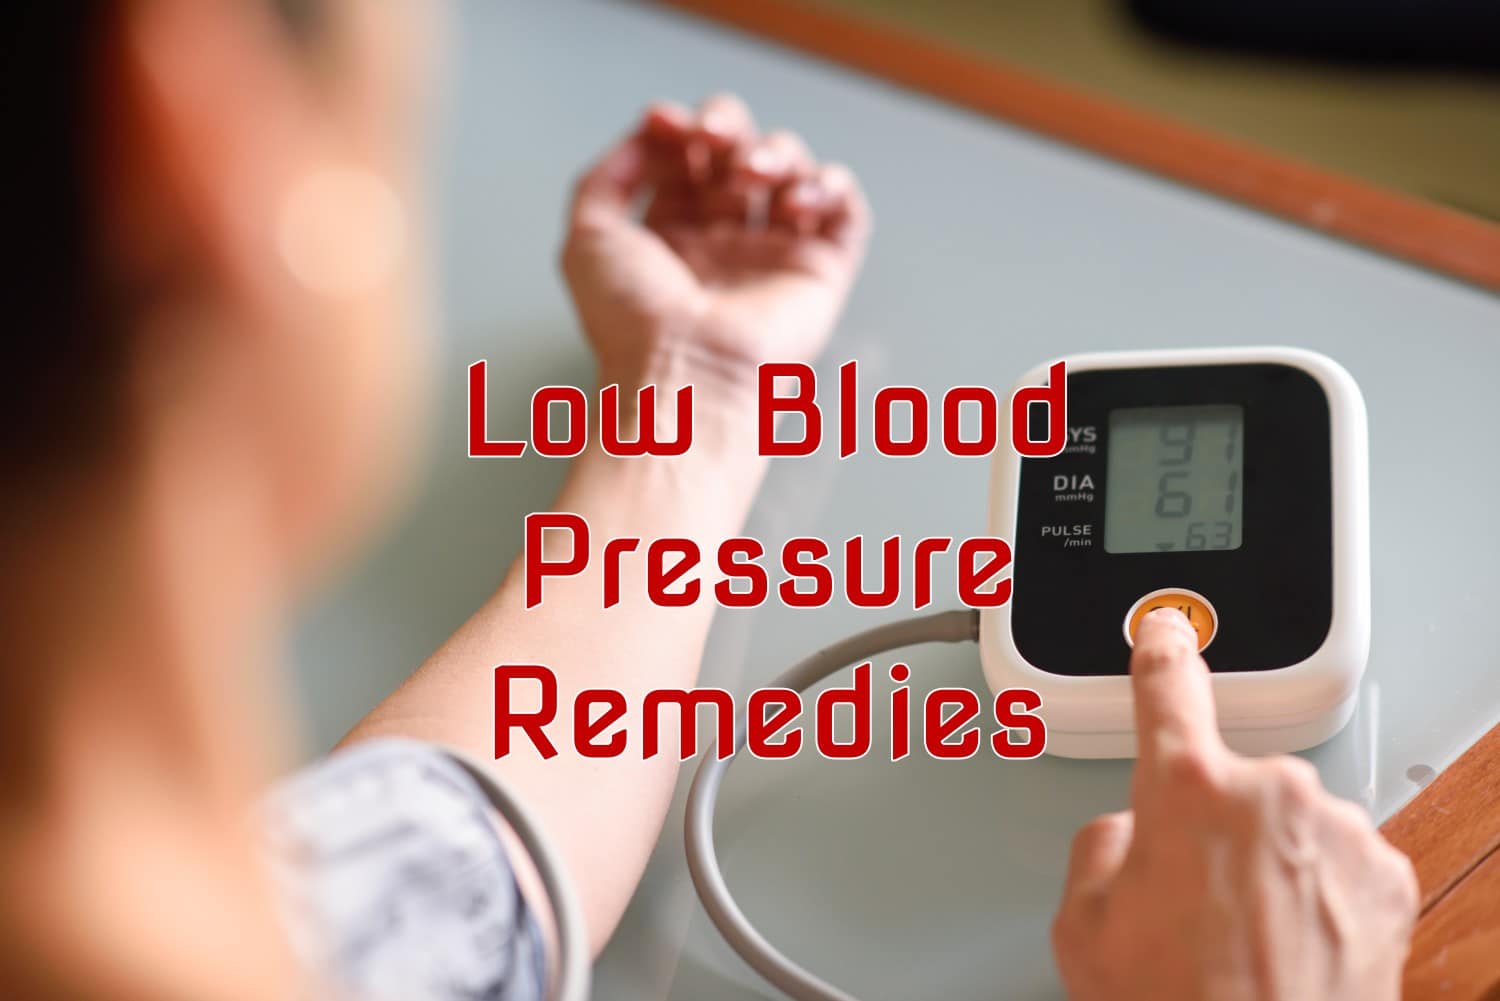 designersuitings: What To Do When You Have Low Blood Pressure